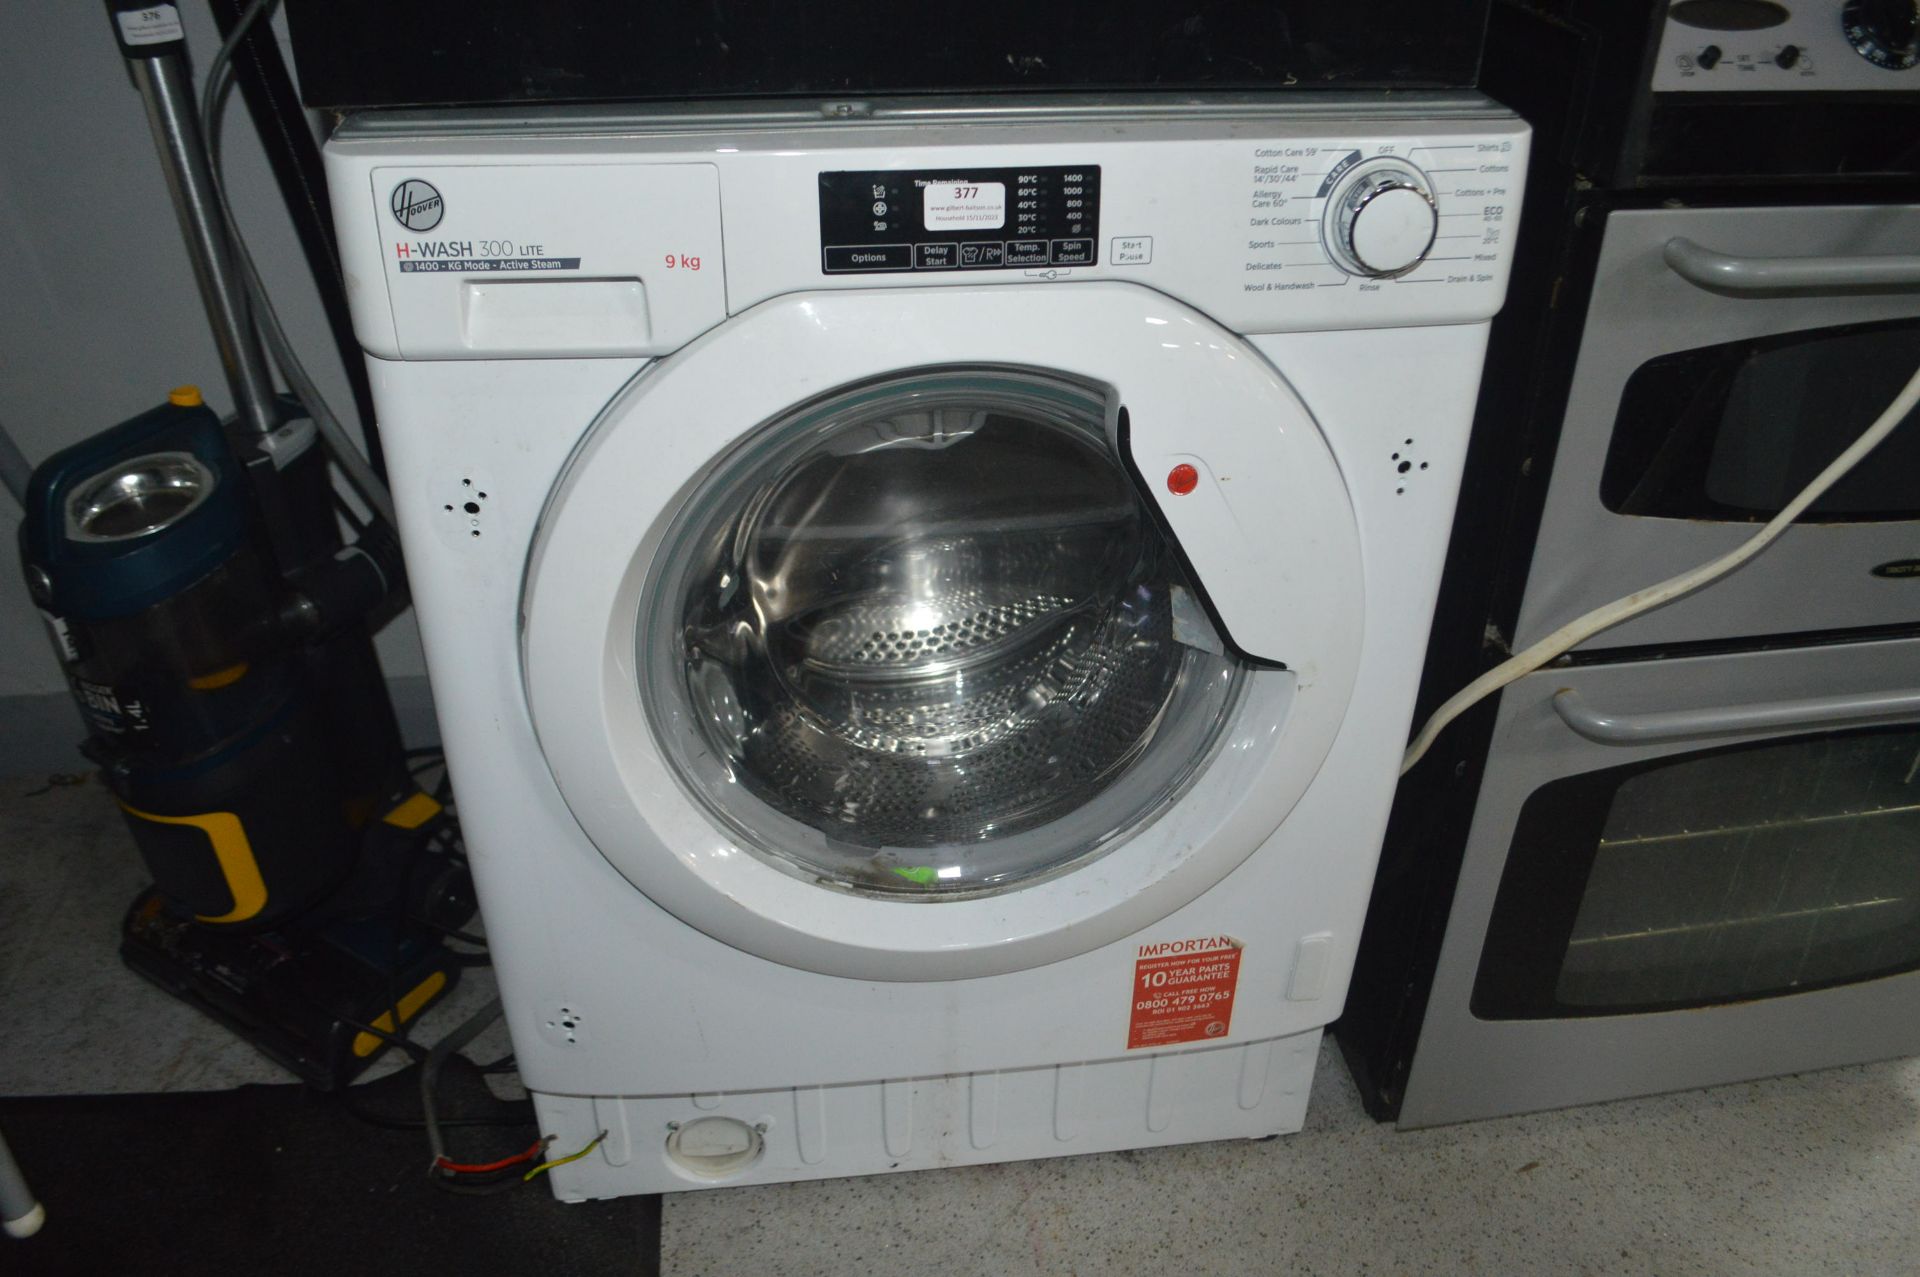 Hoover H Wash 300 Light Integrated Washing machine